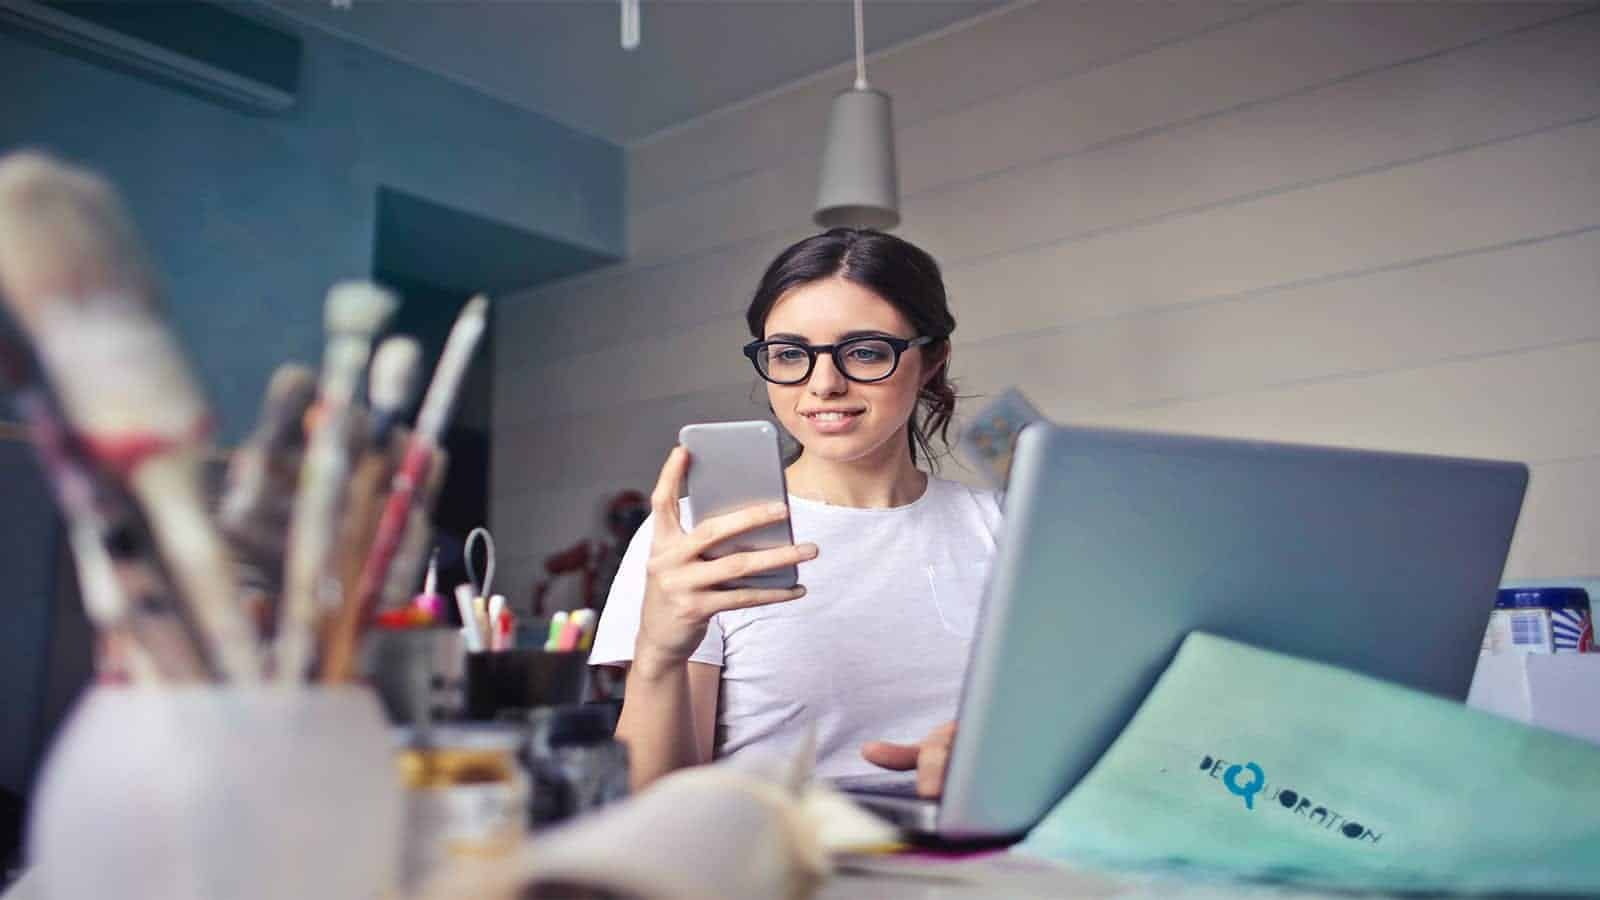 photo of a women smiling at her cell phone while doing work